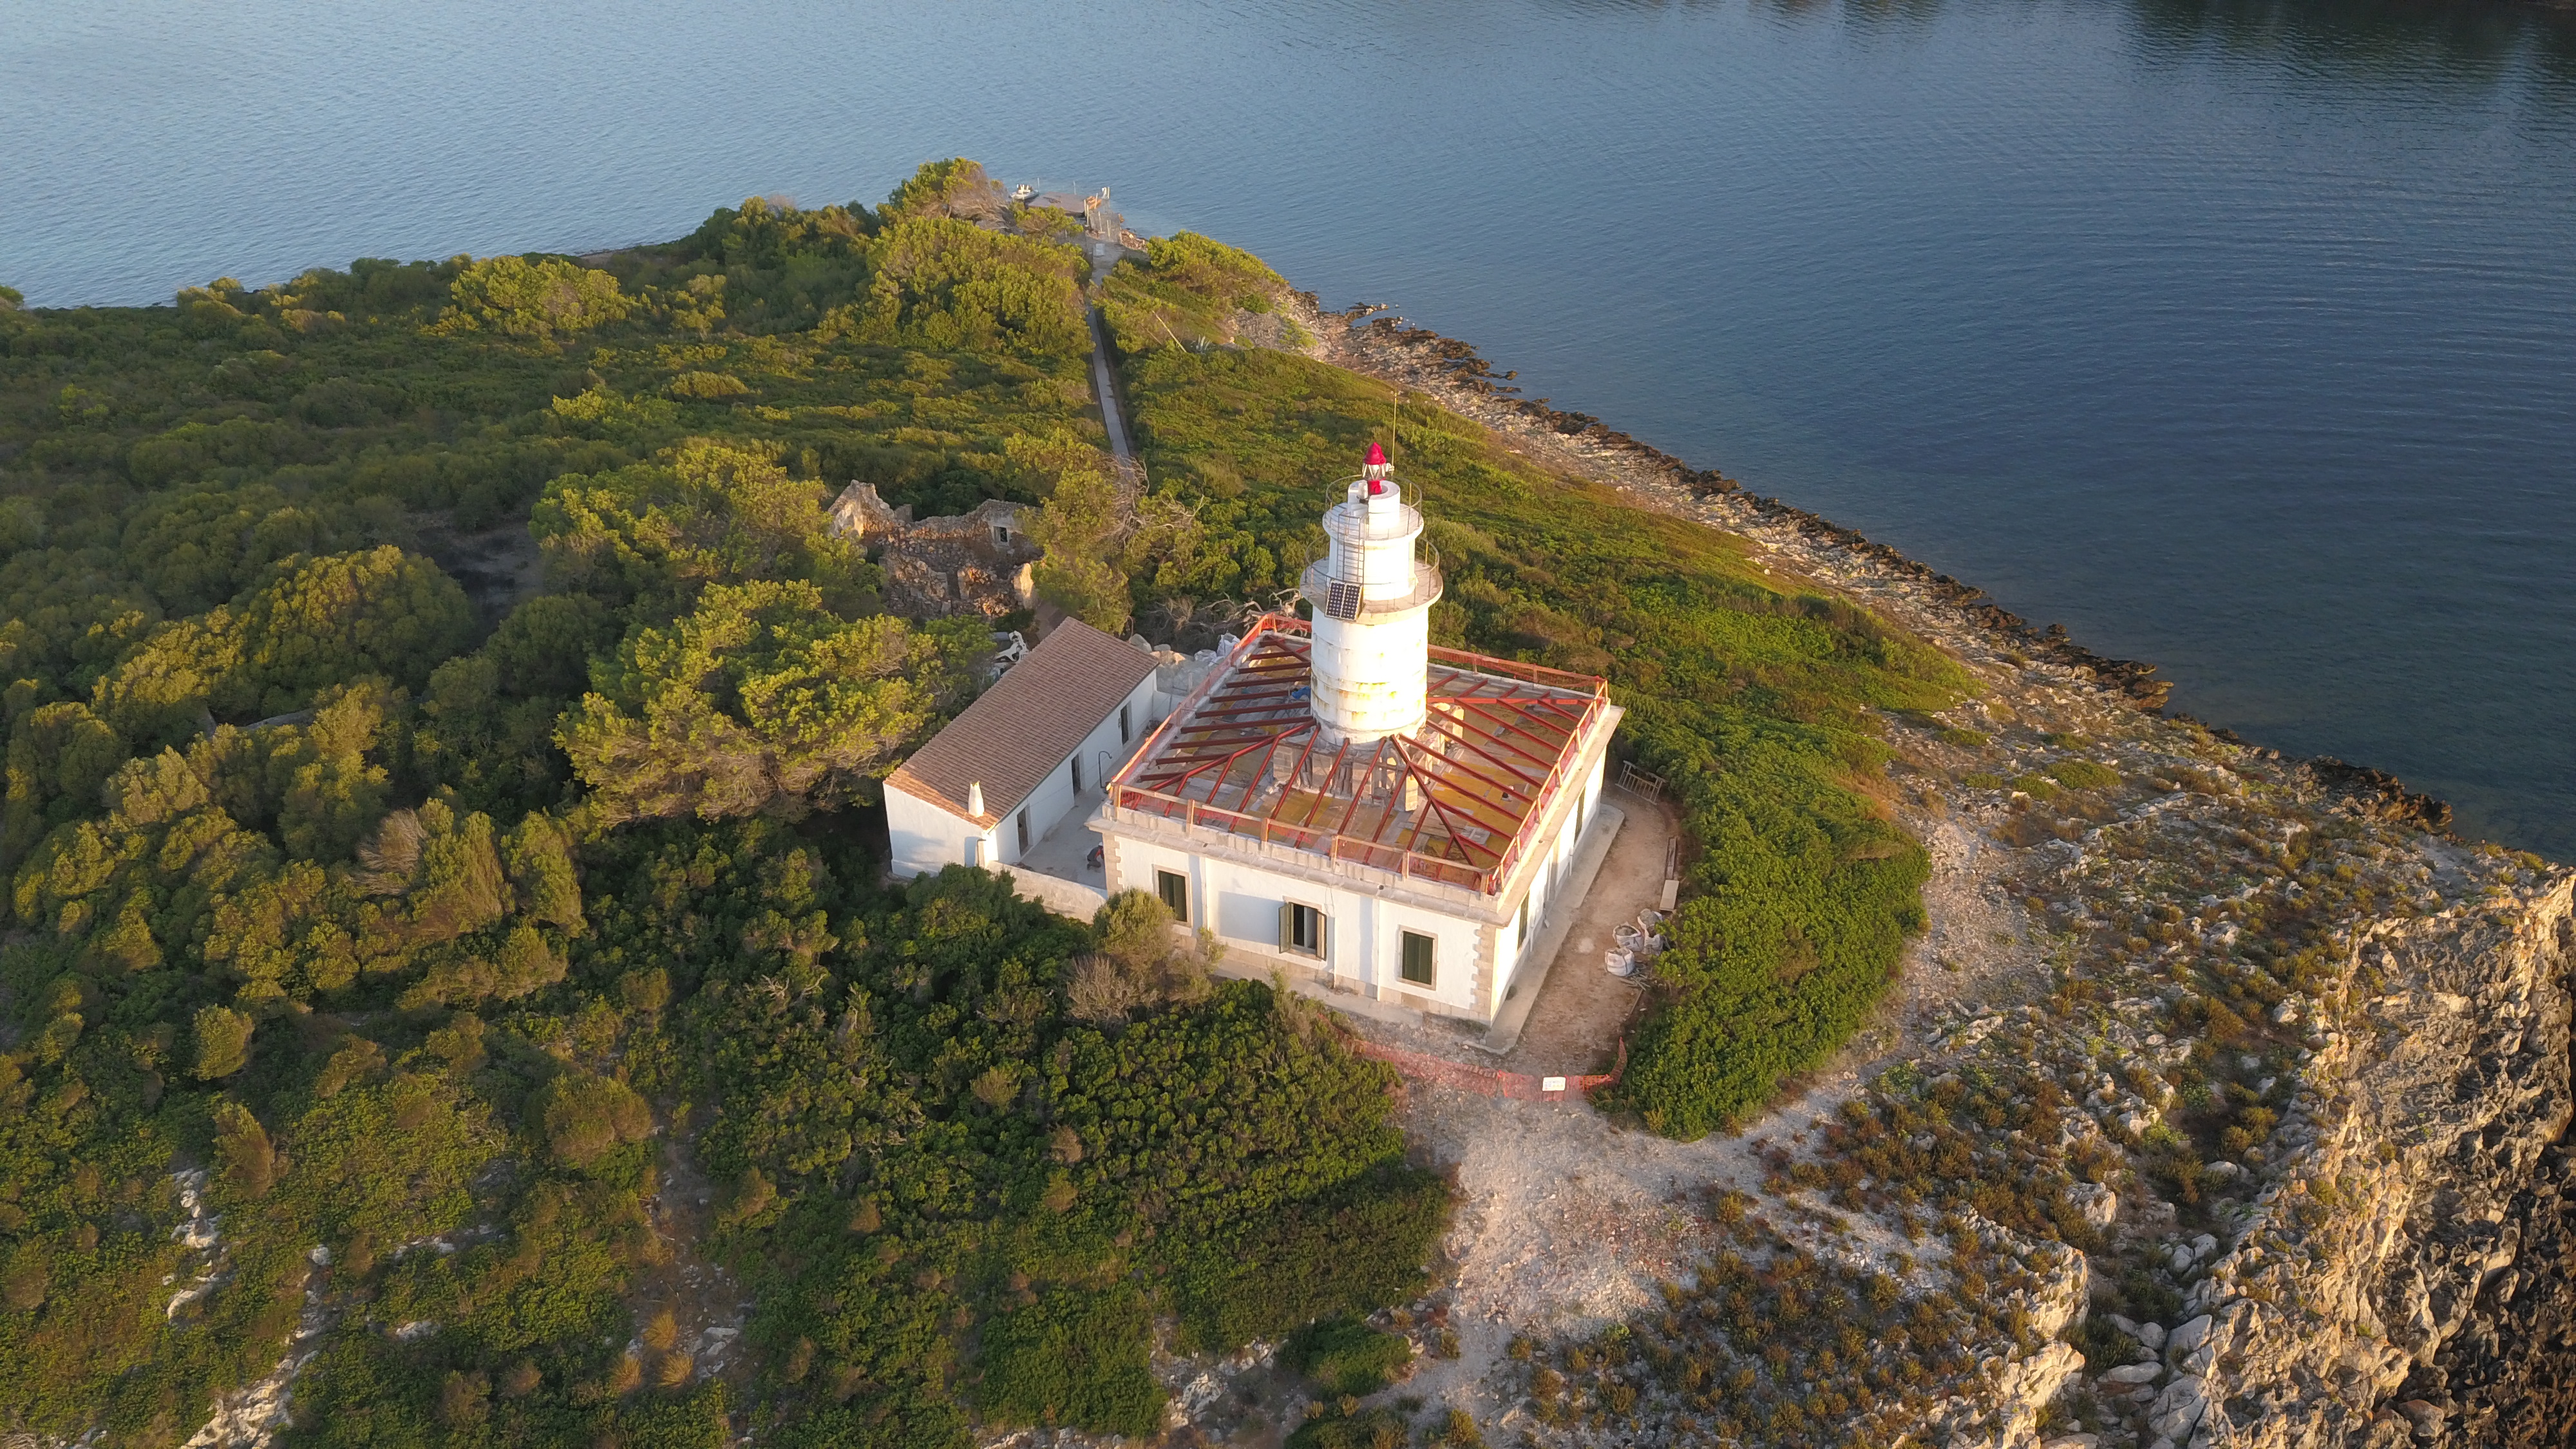 Restoration work on the roof of the Alcanada lighthouse is completed